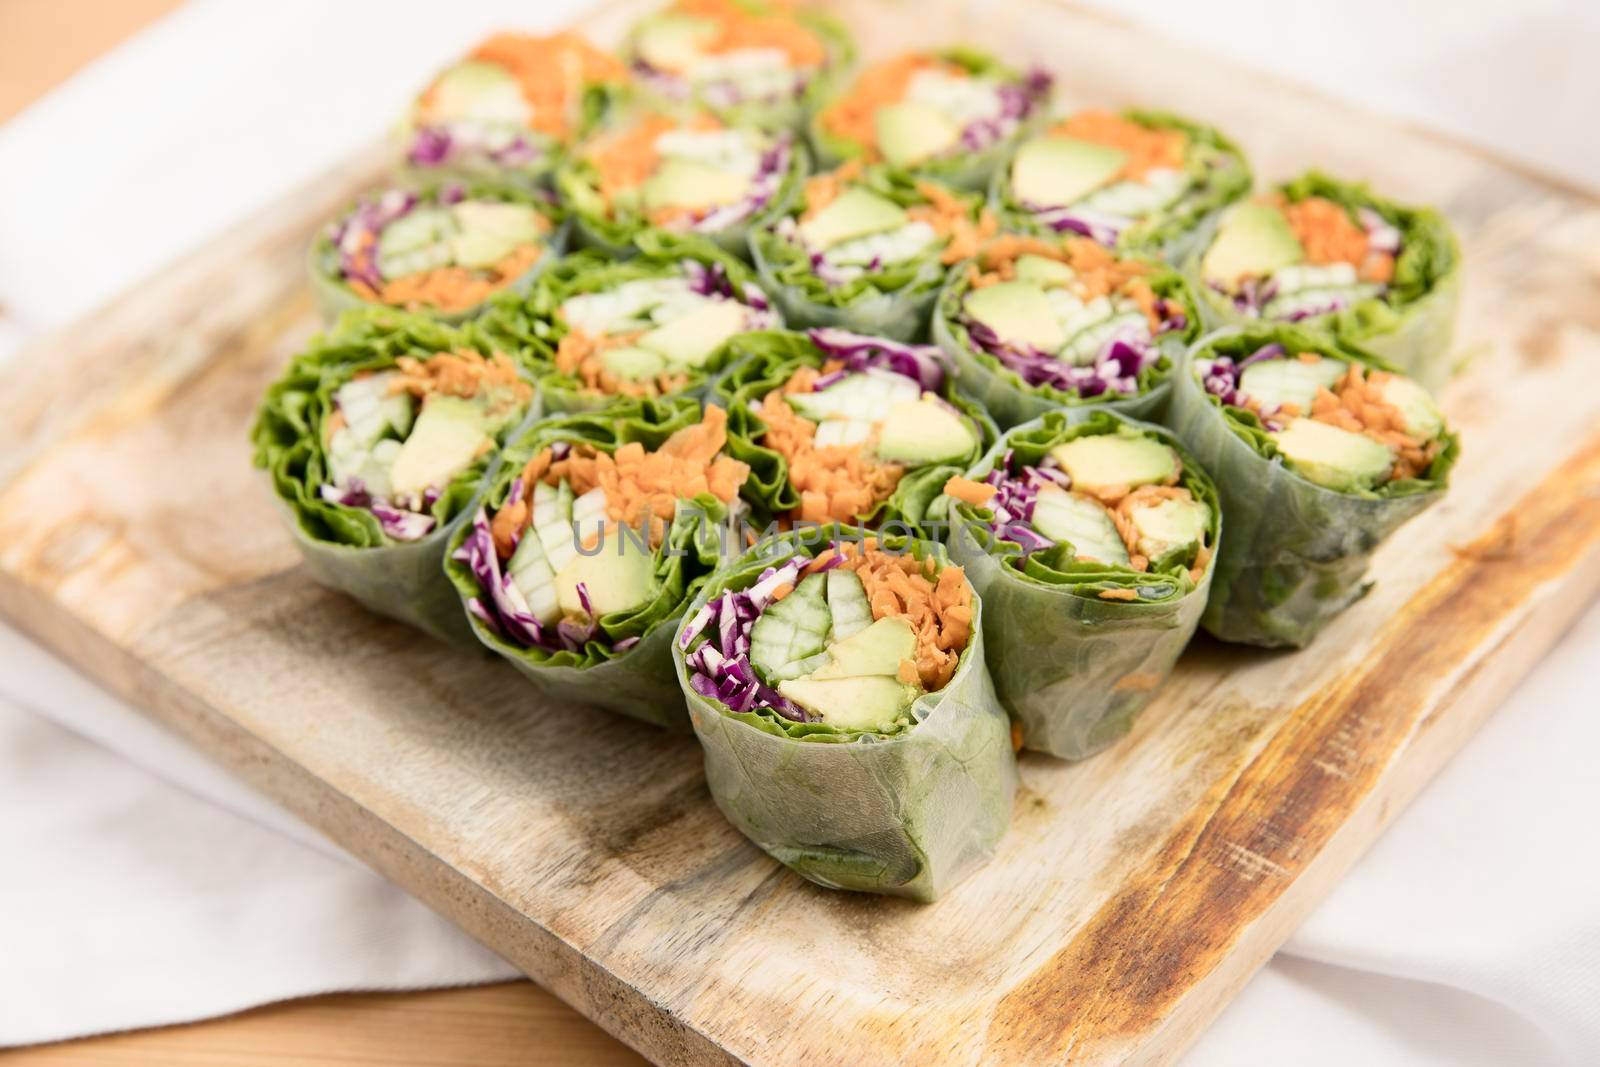 Vegetarian spring rolls with avocado, carrots, cucumber and red cabbage.